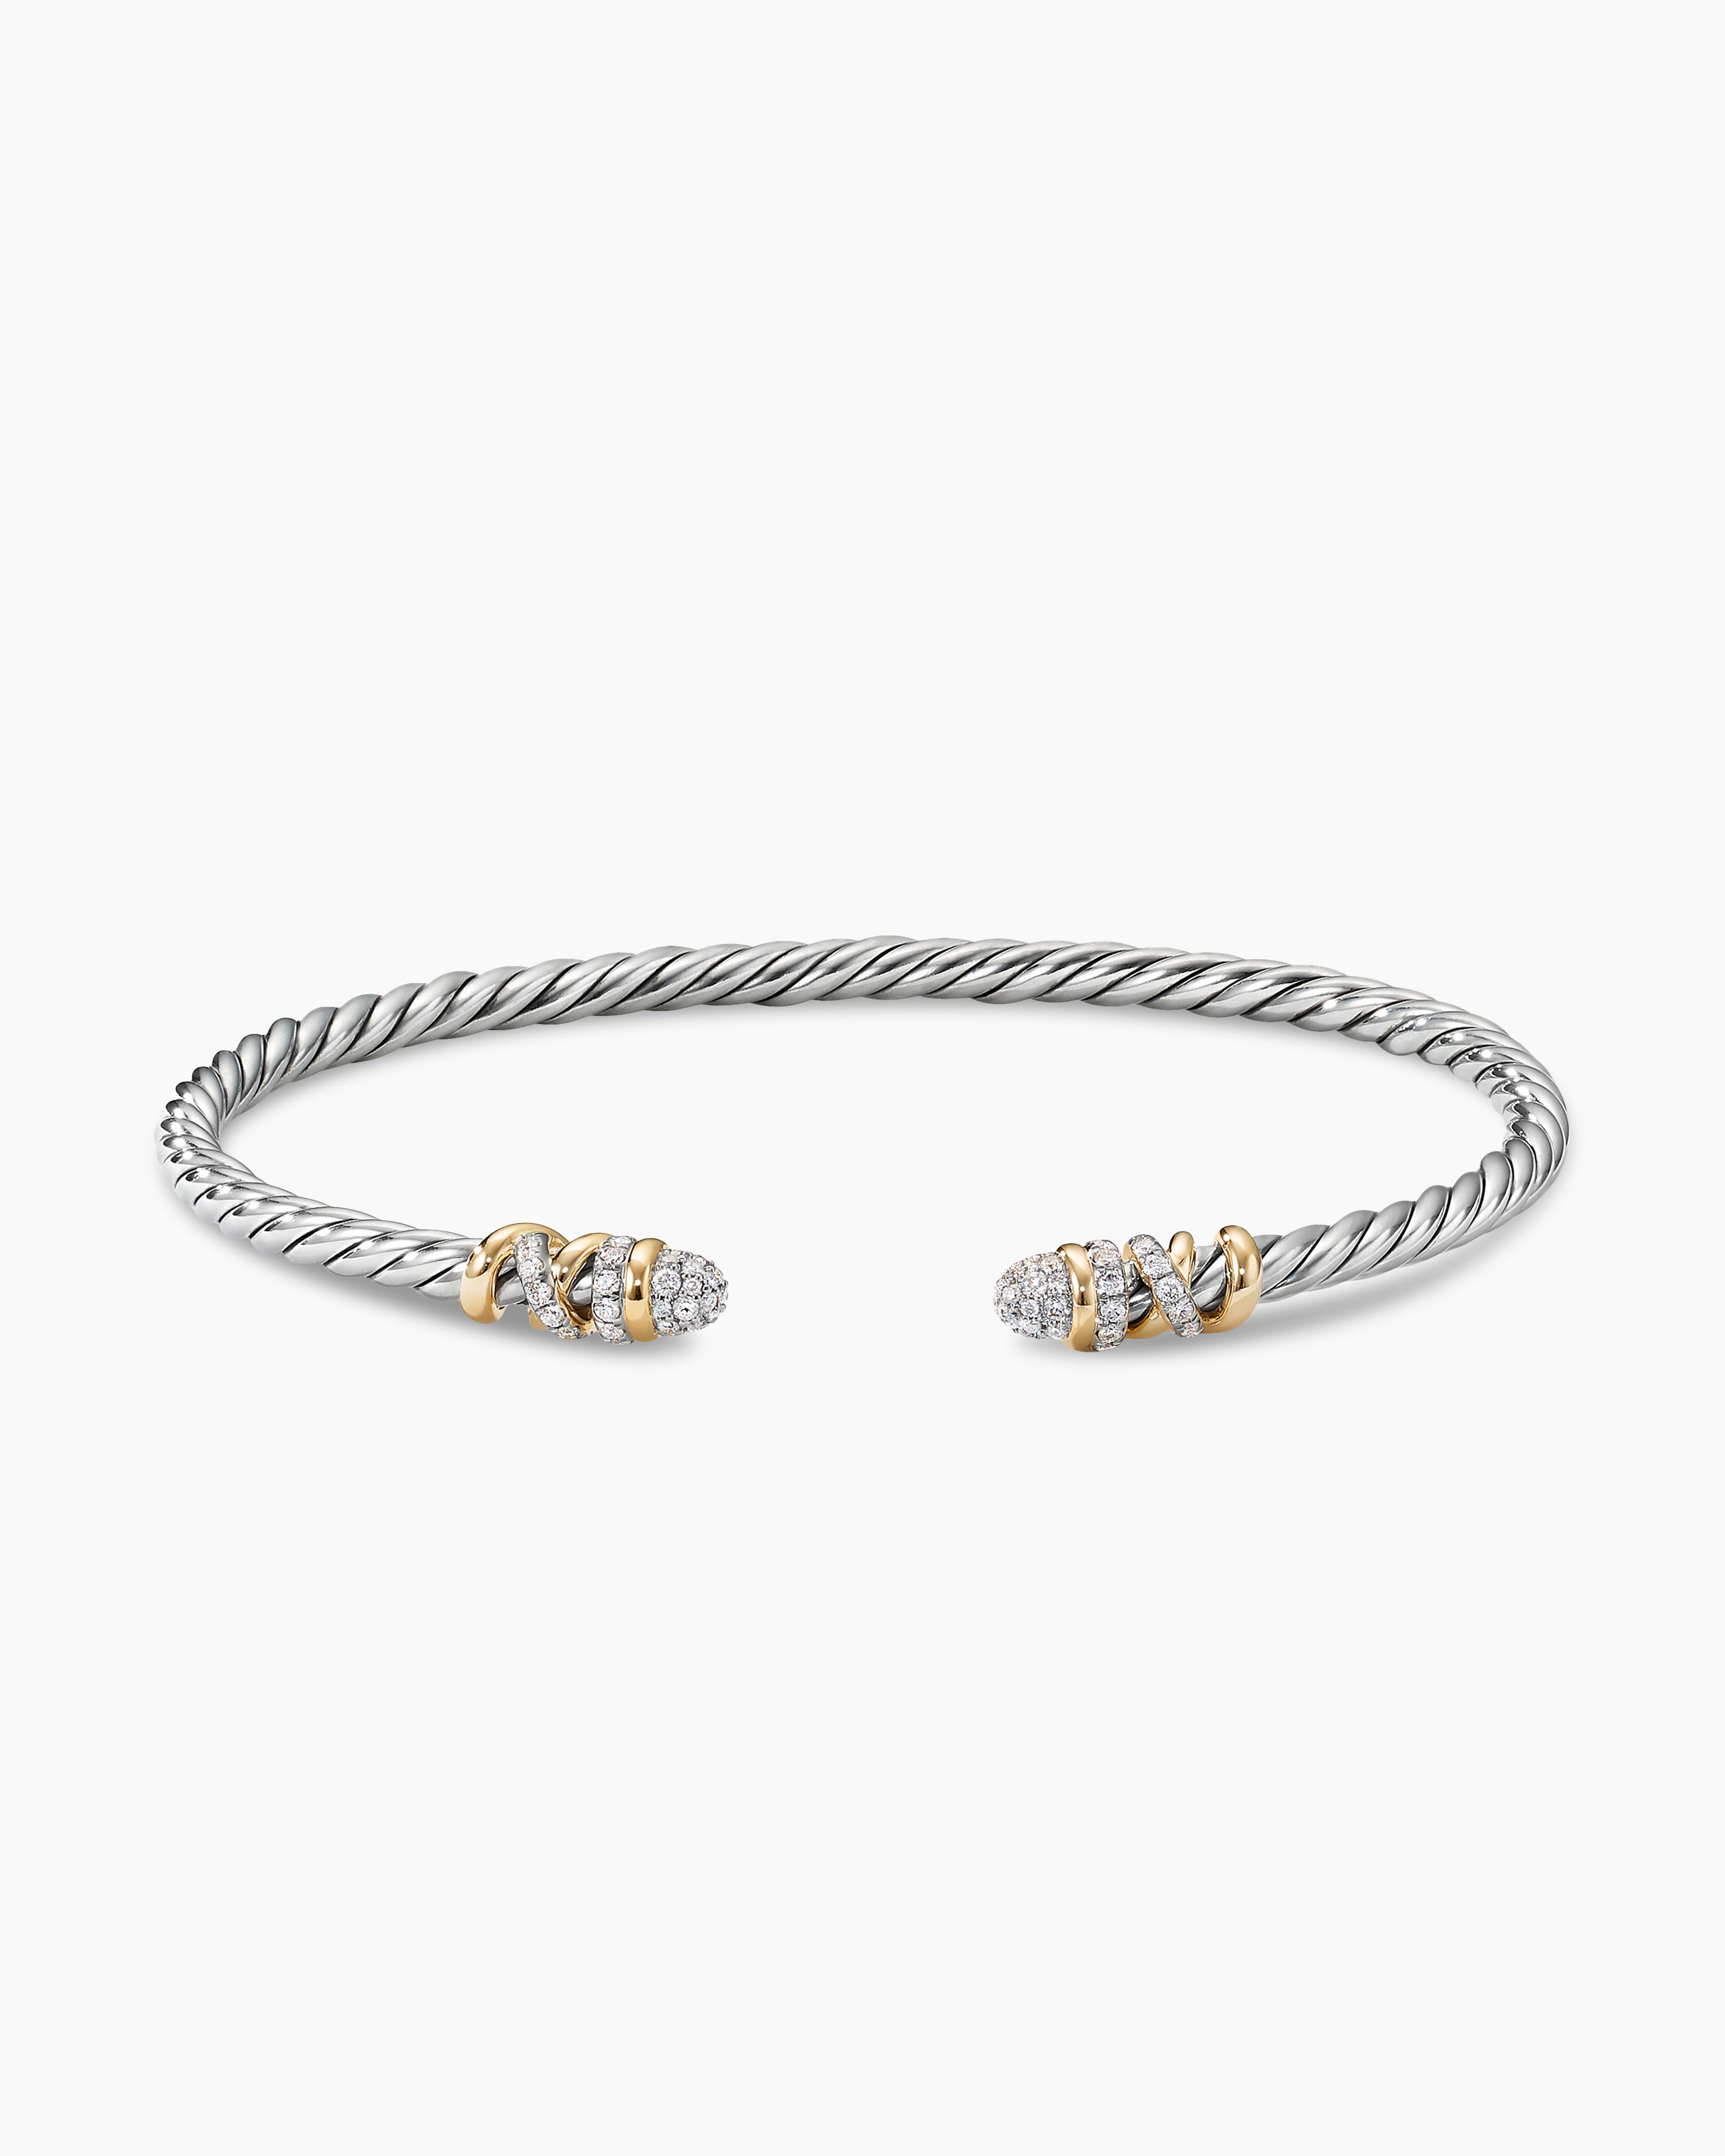 Petite Helena Classic Cable Bracelet in Sterling Silver with 18K Yellow Gold  and Diamonds, 3mm | David Yurman